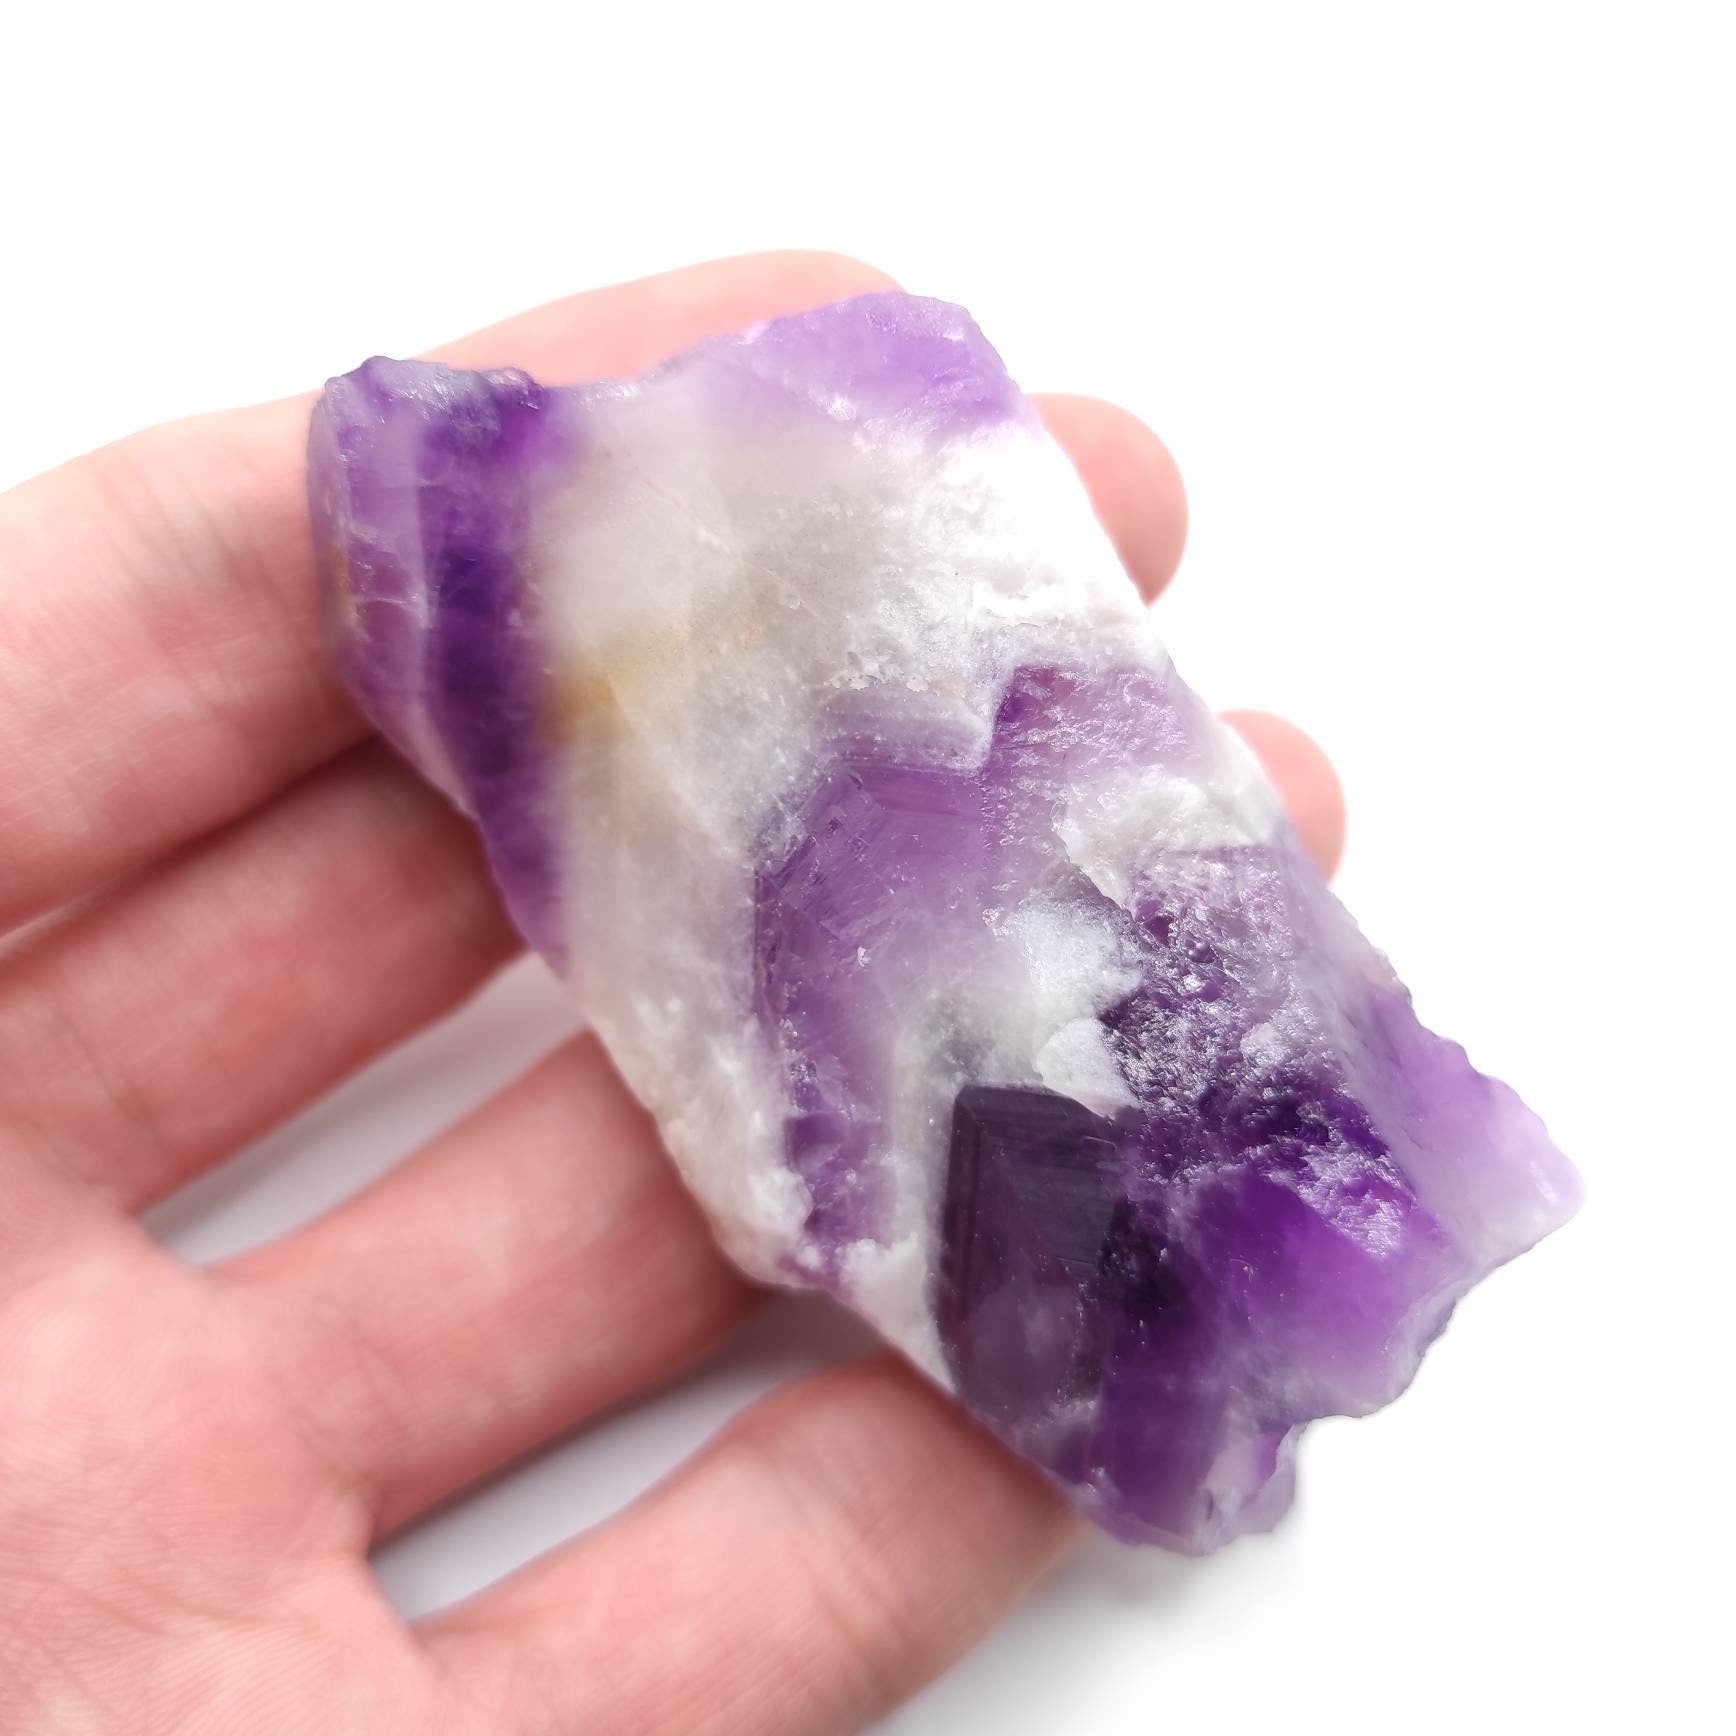 74g One-of-a-Kind Chevron Amethyst Point - Natural Purple and White Rough Chevron Amethyst - Dream Amethyst Point - Raw Amethyst Crystal